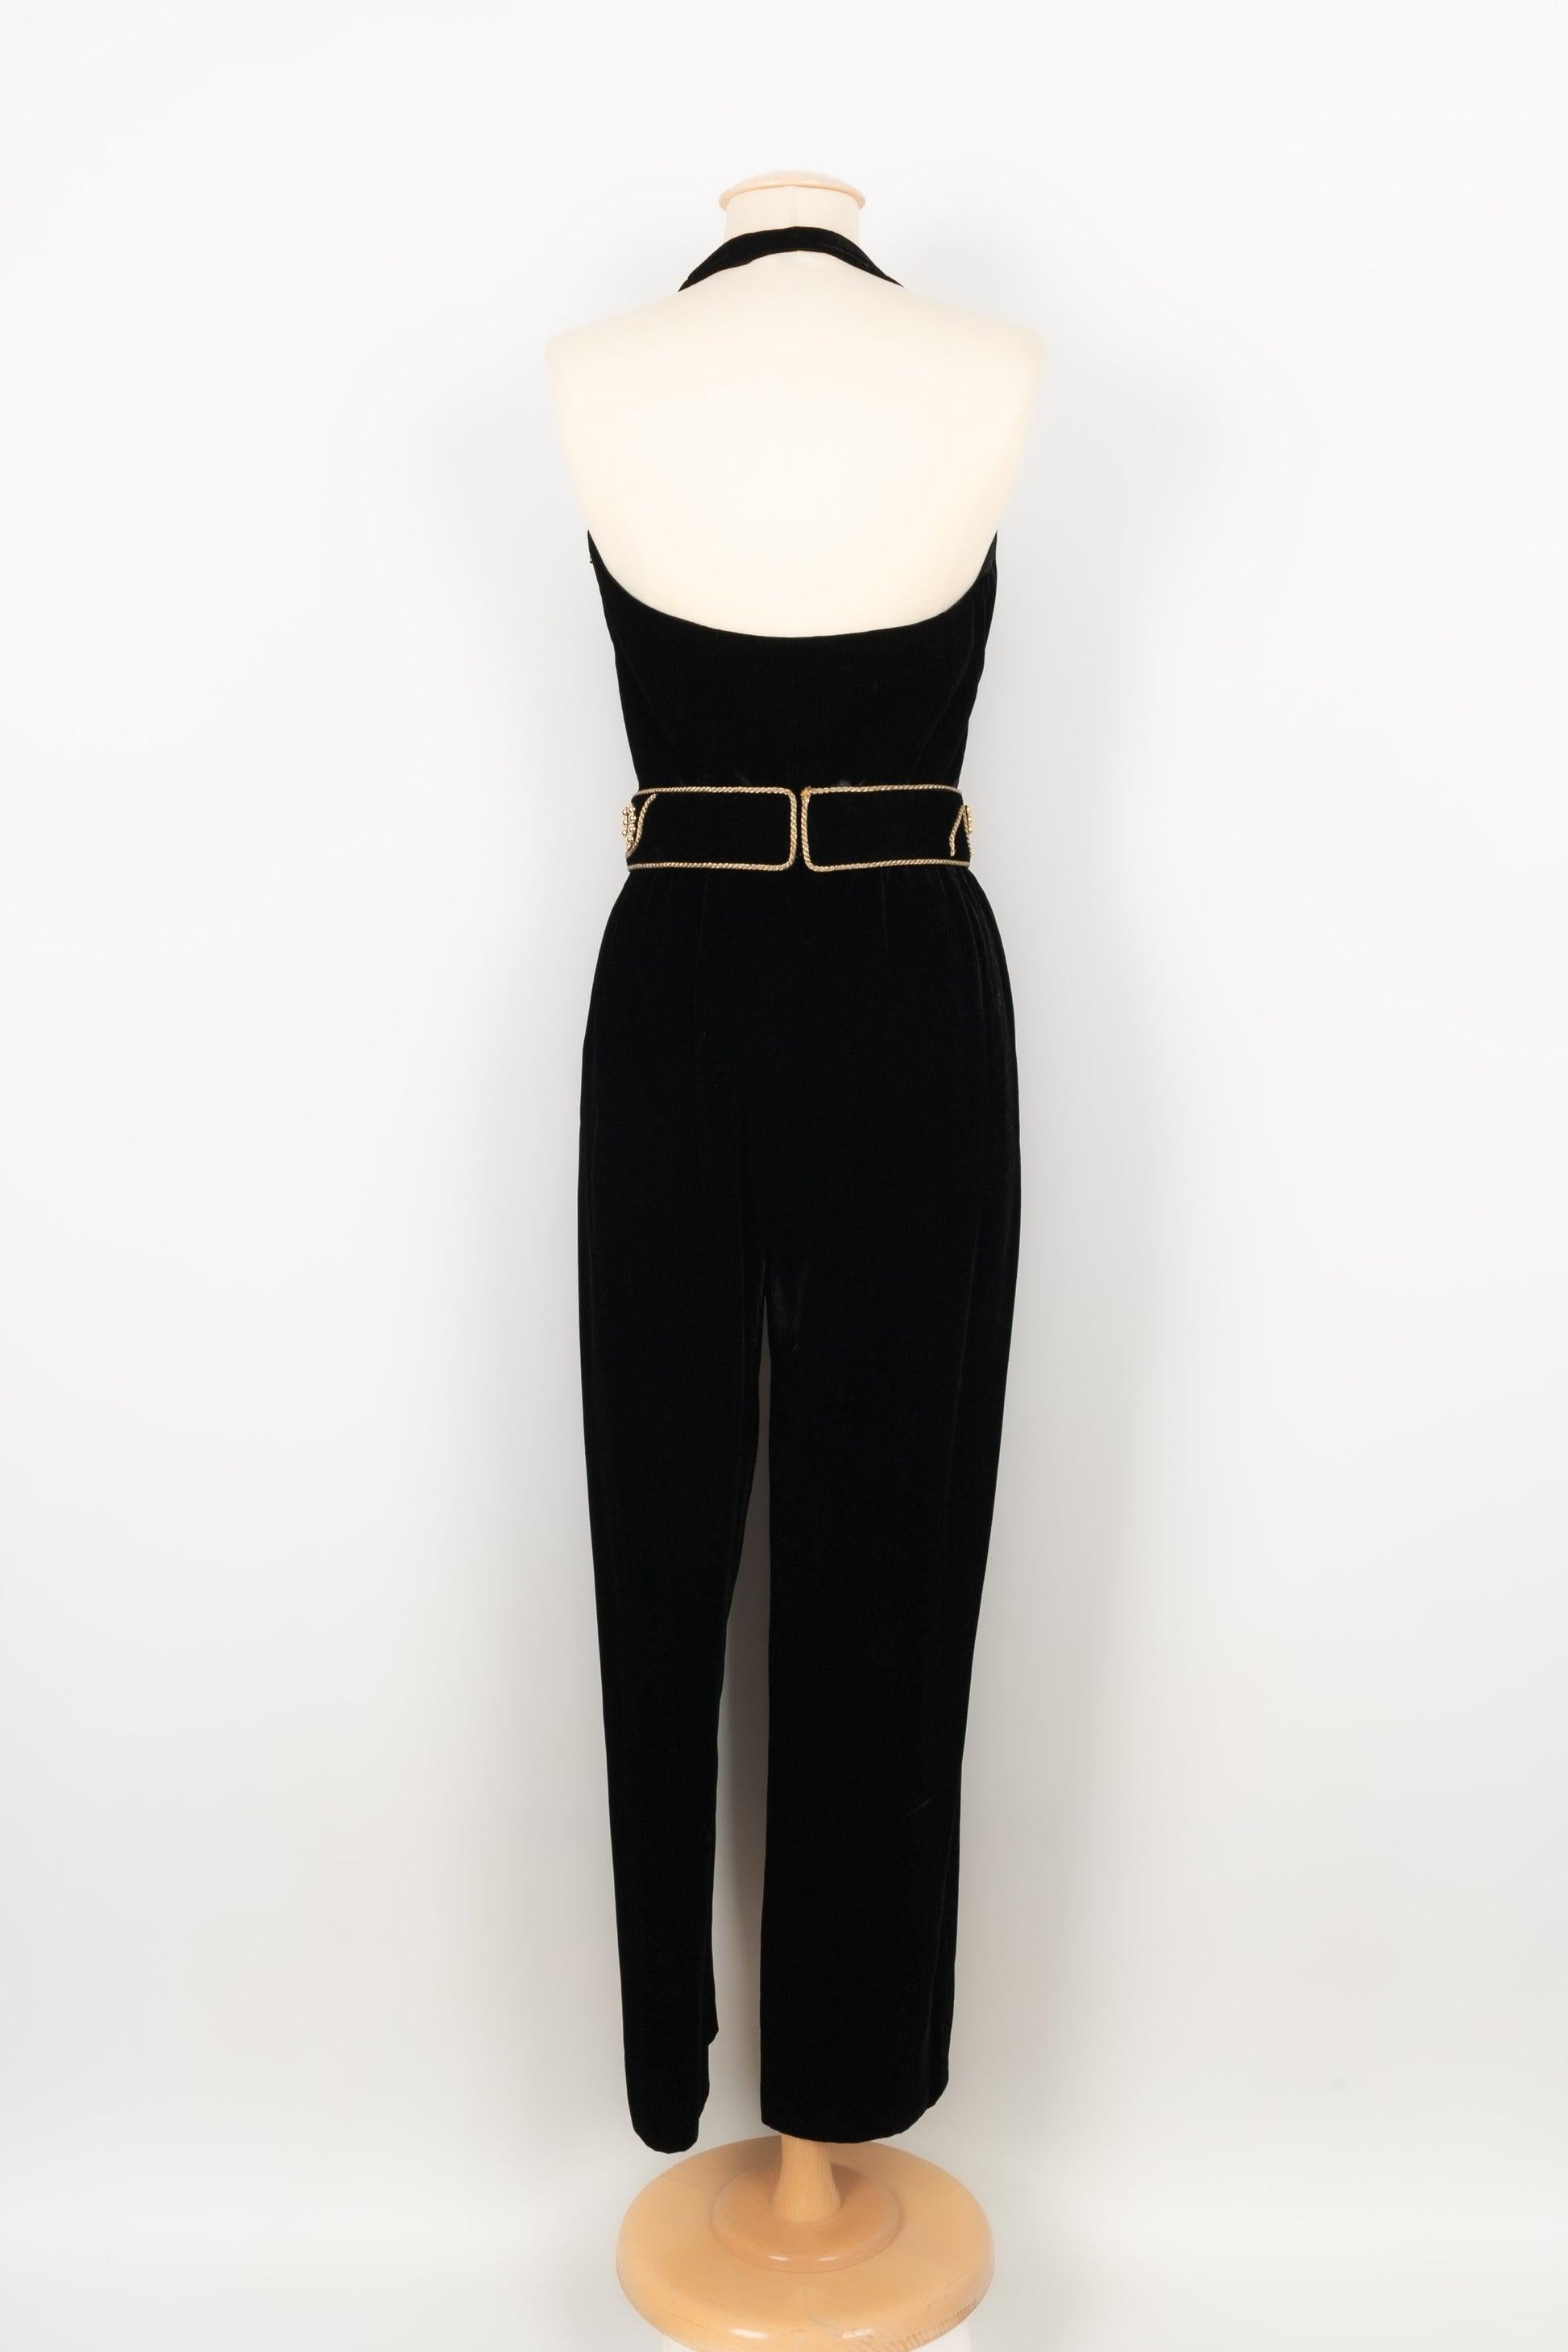 Black Givenchy Set Composed of Jacket Highly Embroidered Jumpsuit, circa 1980